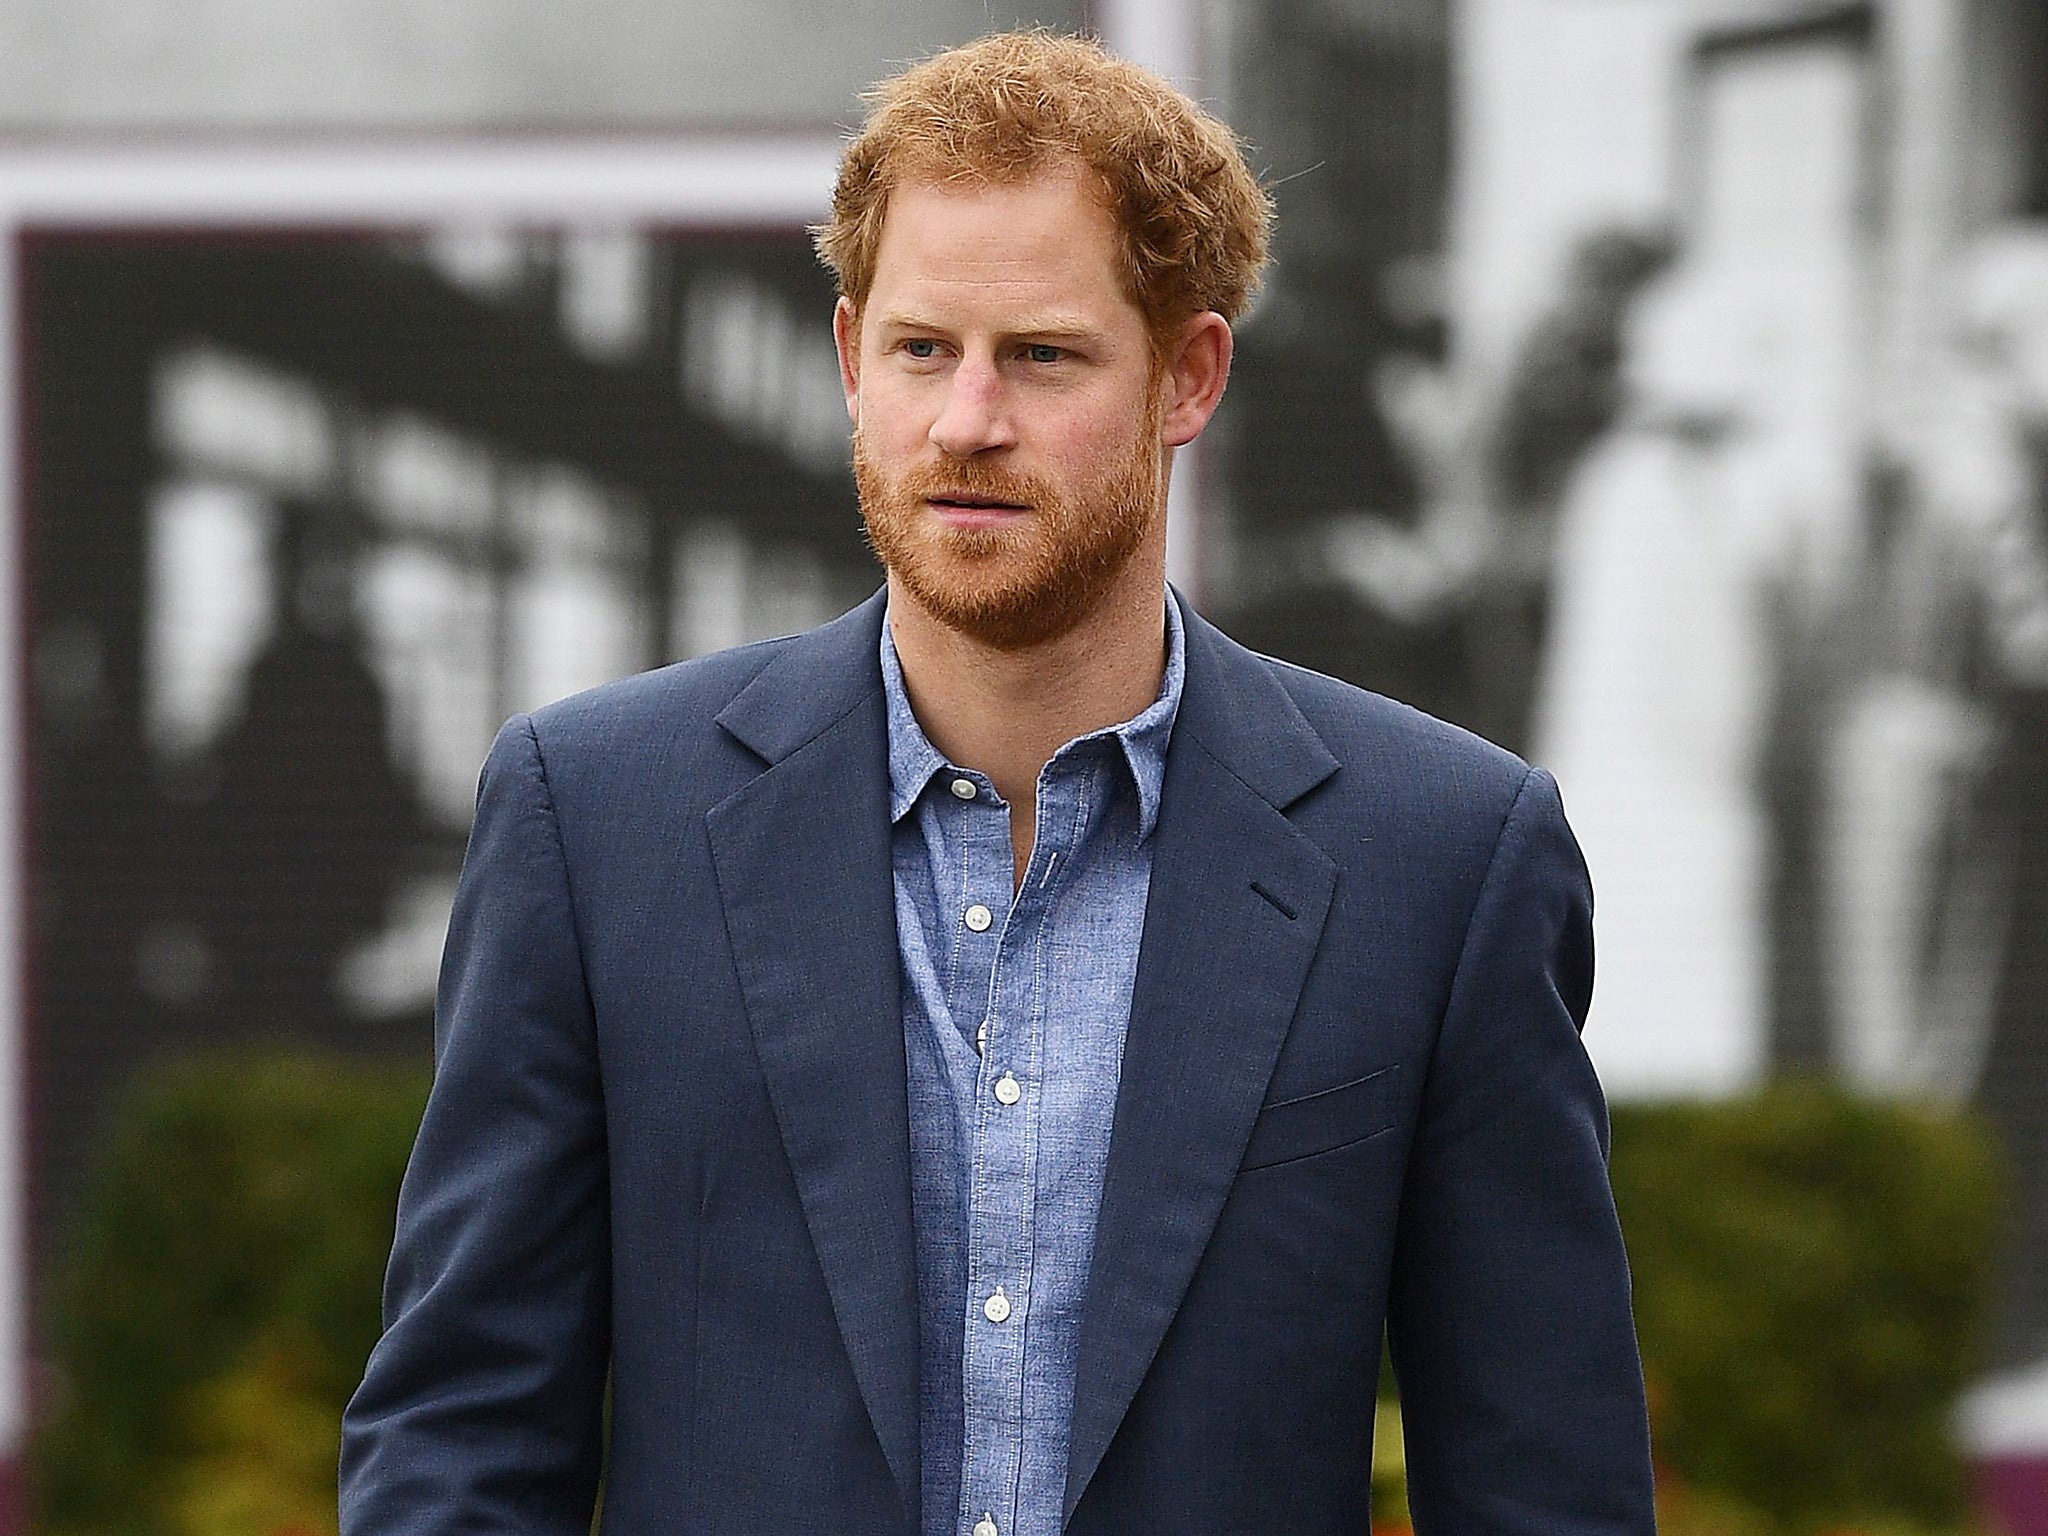 Prince Harry Through the Years: His Life in Photos